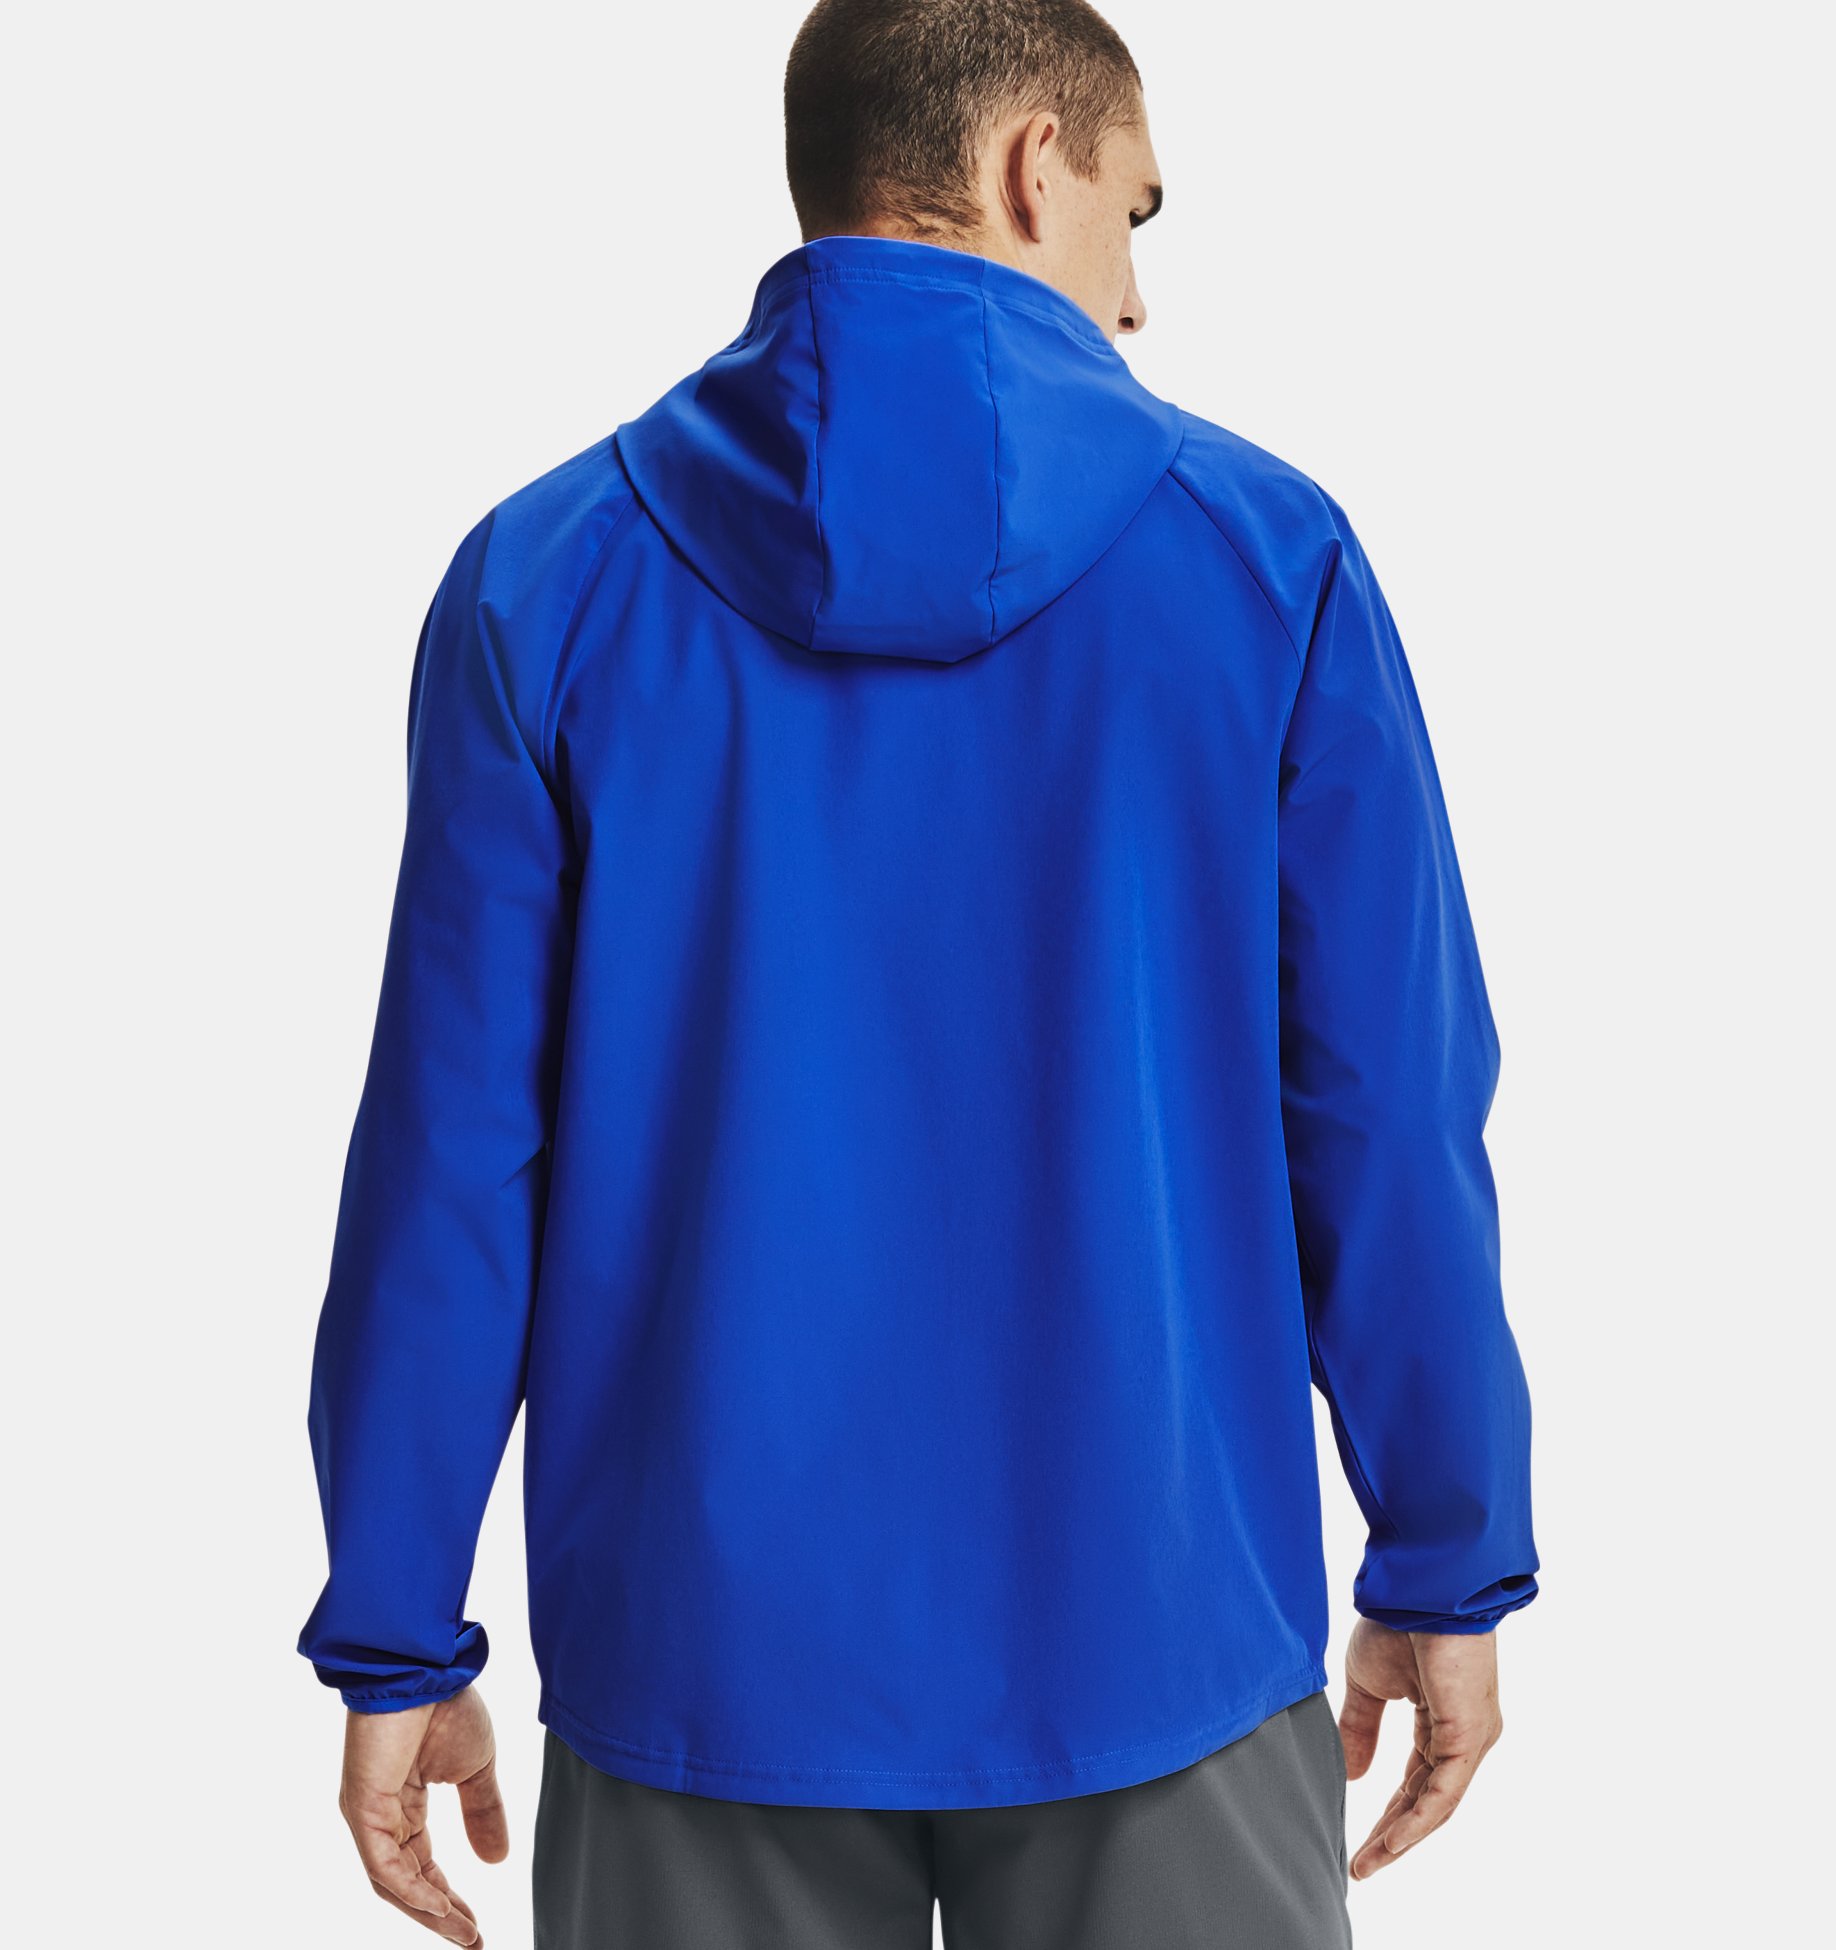 Visita lo Store di Under ArmourUnder Armour Stretch Woven Full Zip Jacket Maniche Lunghe Uomo 